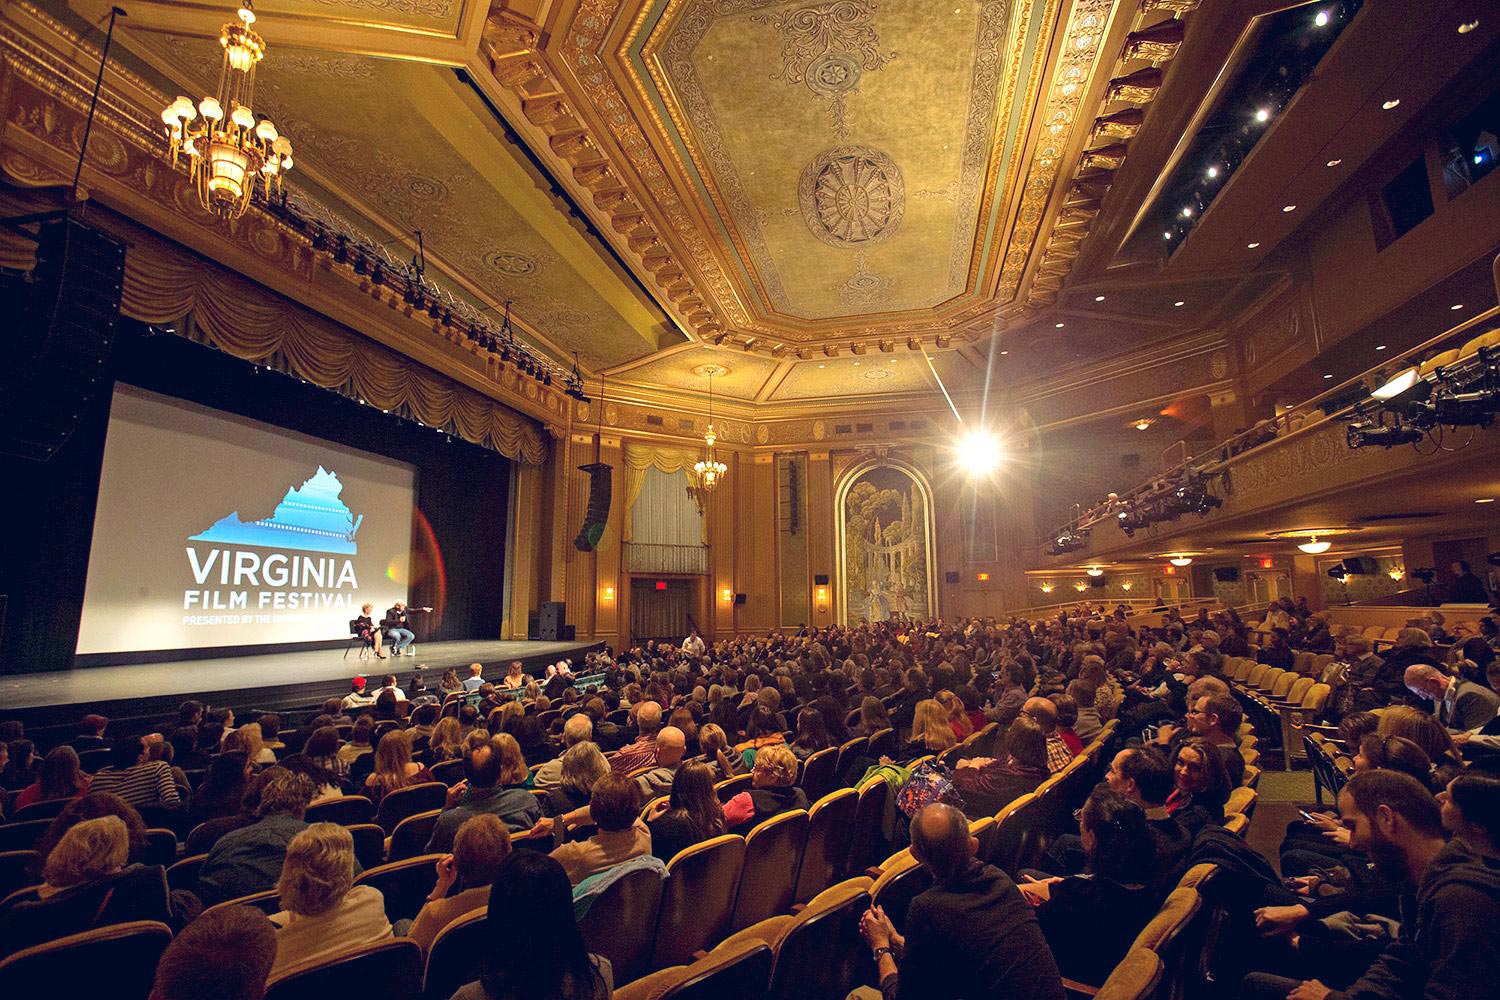 Theatre filled with people looking at speakers on stage during the Virginia Film Festival